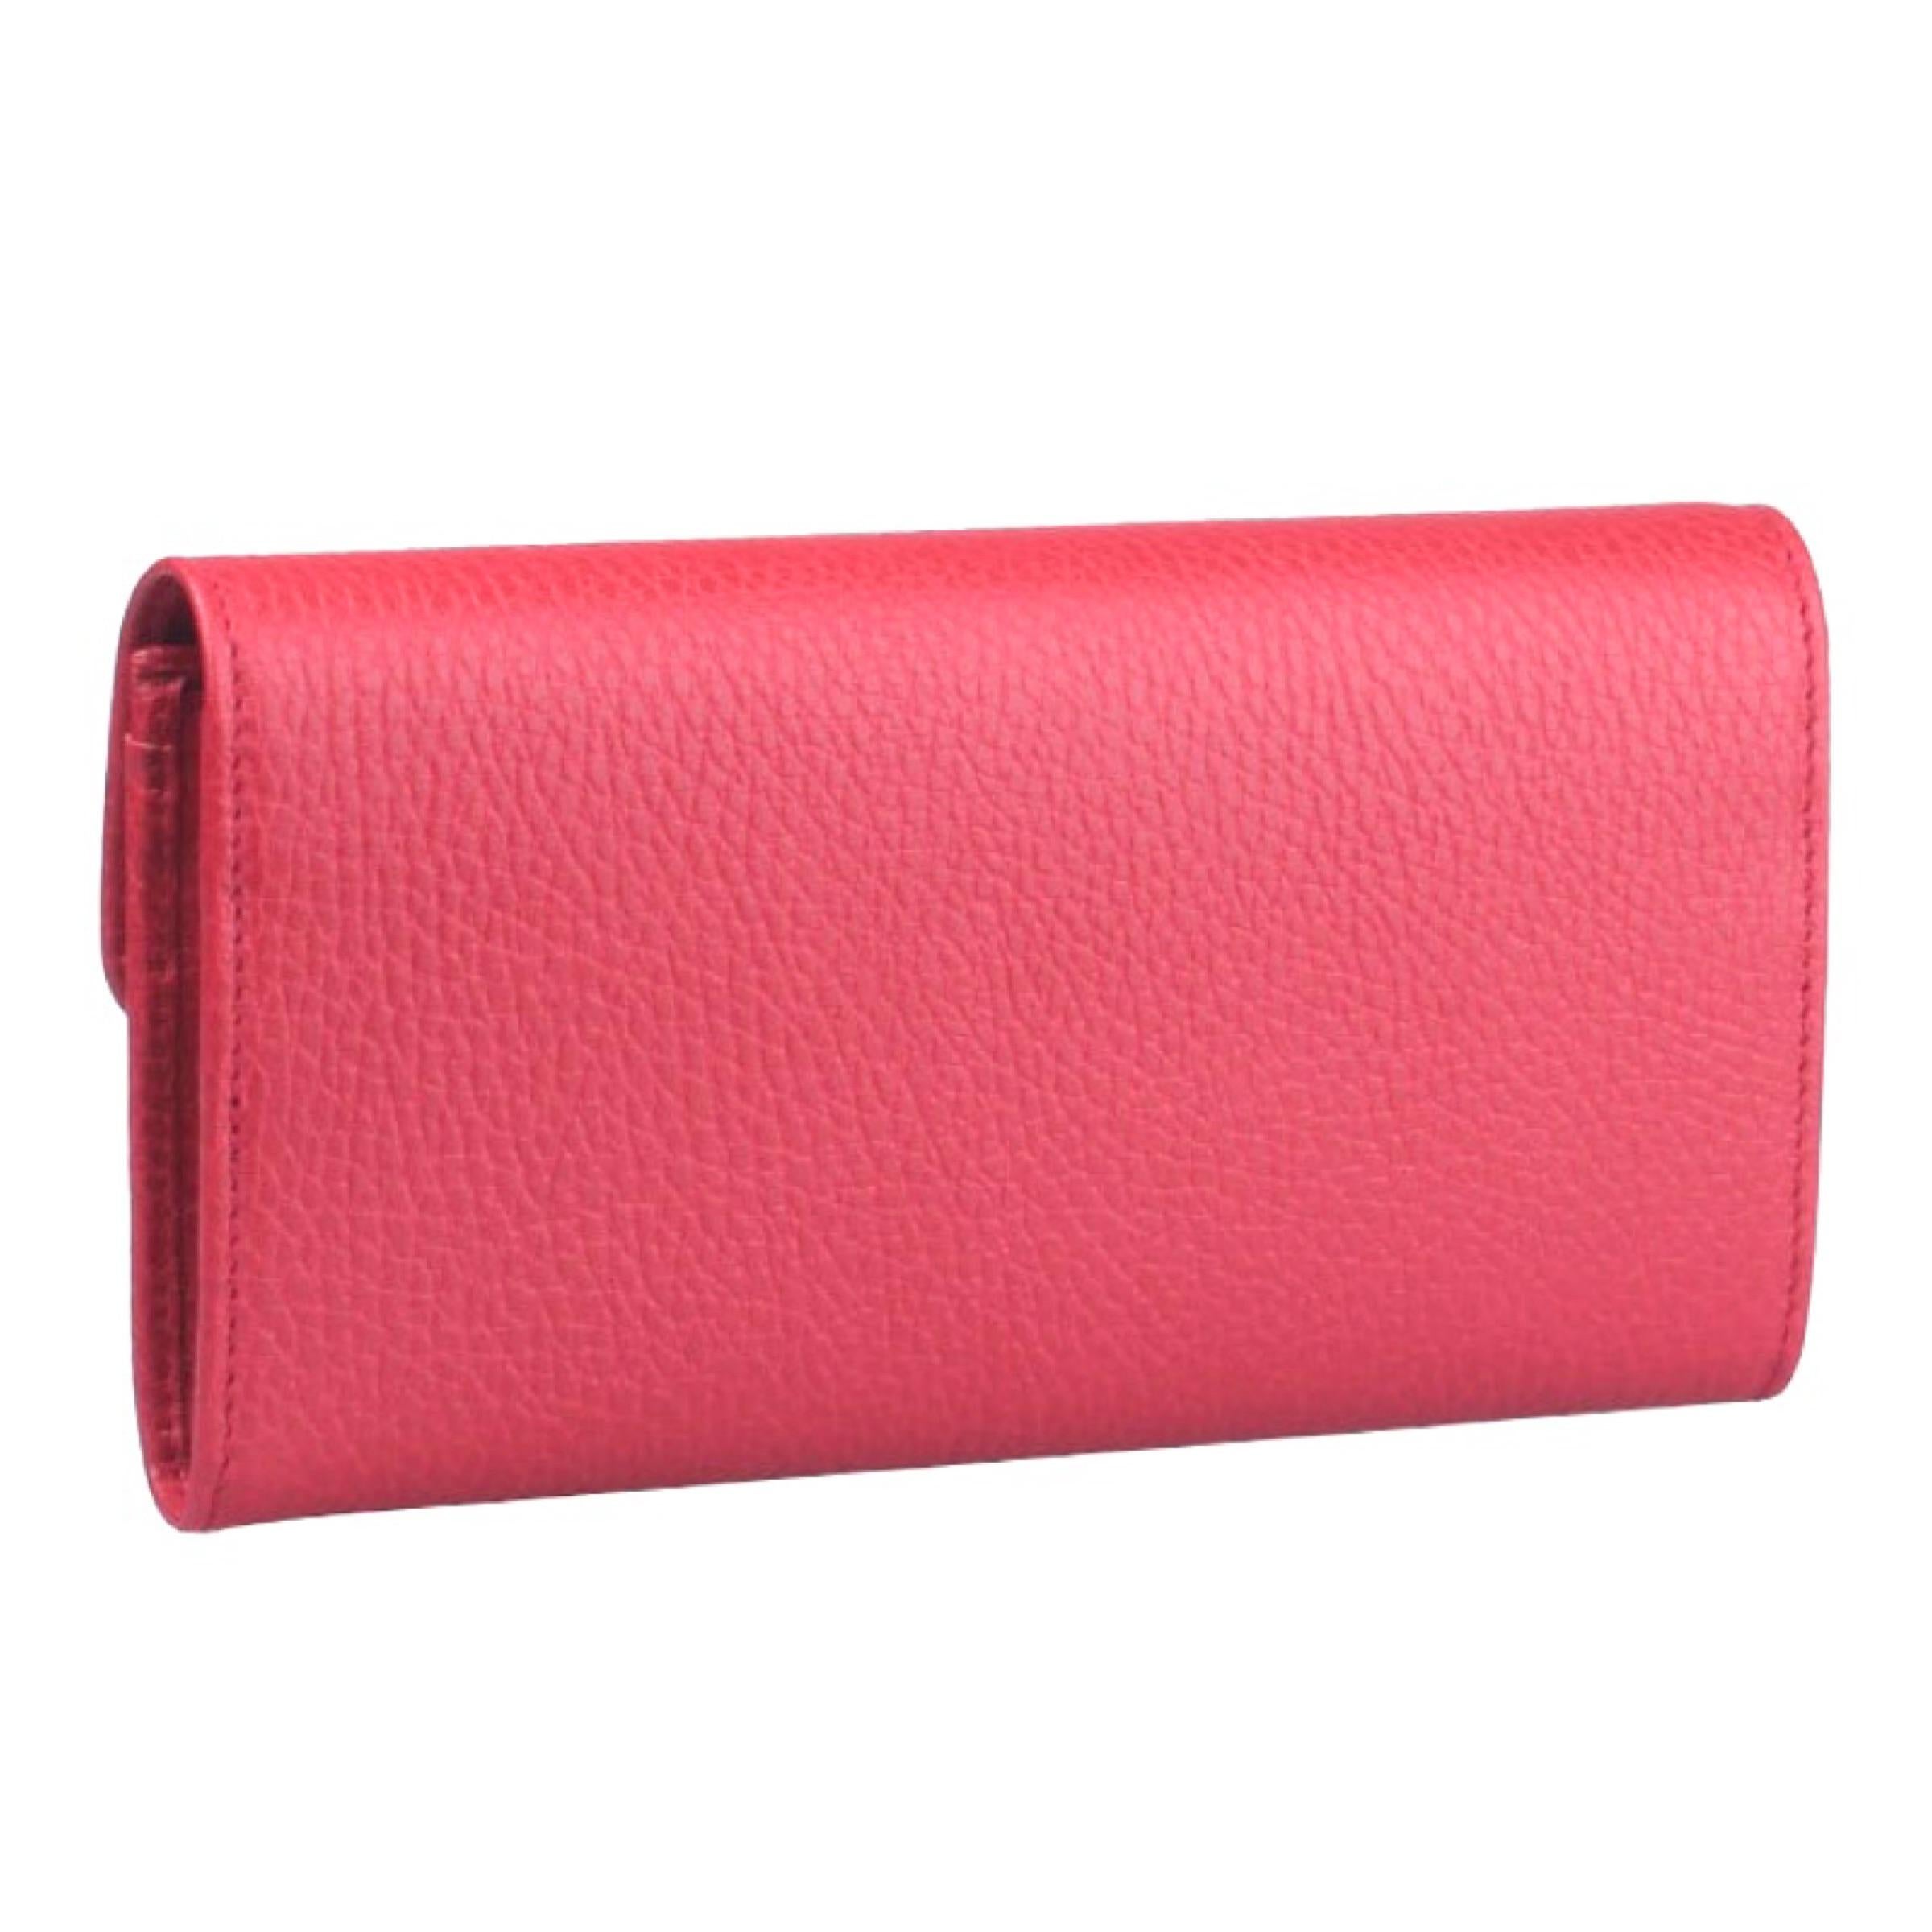 NEW Gucci Red Interlocking G Leather Long Wallet Clutch Bag For Sale 1